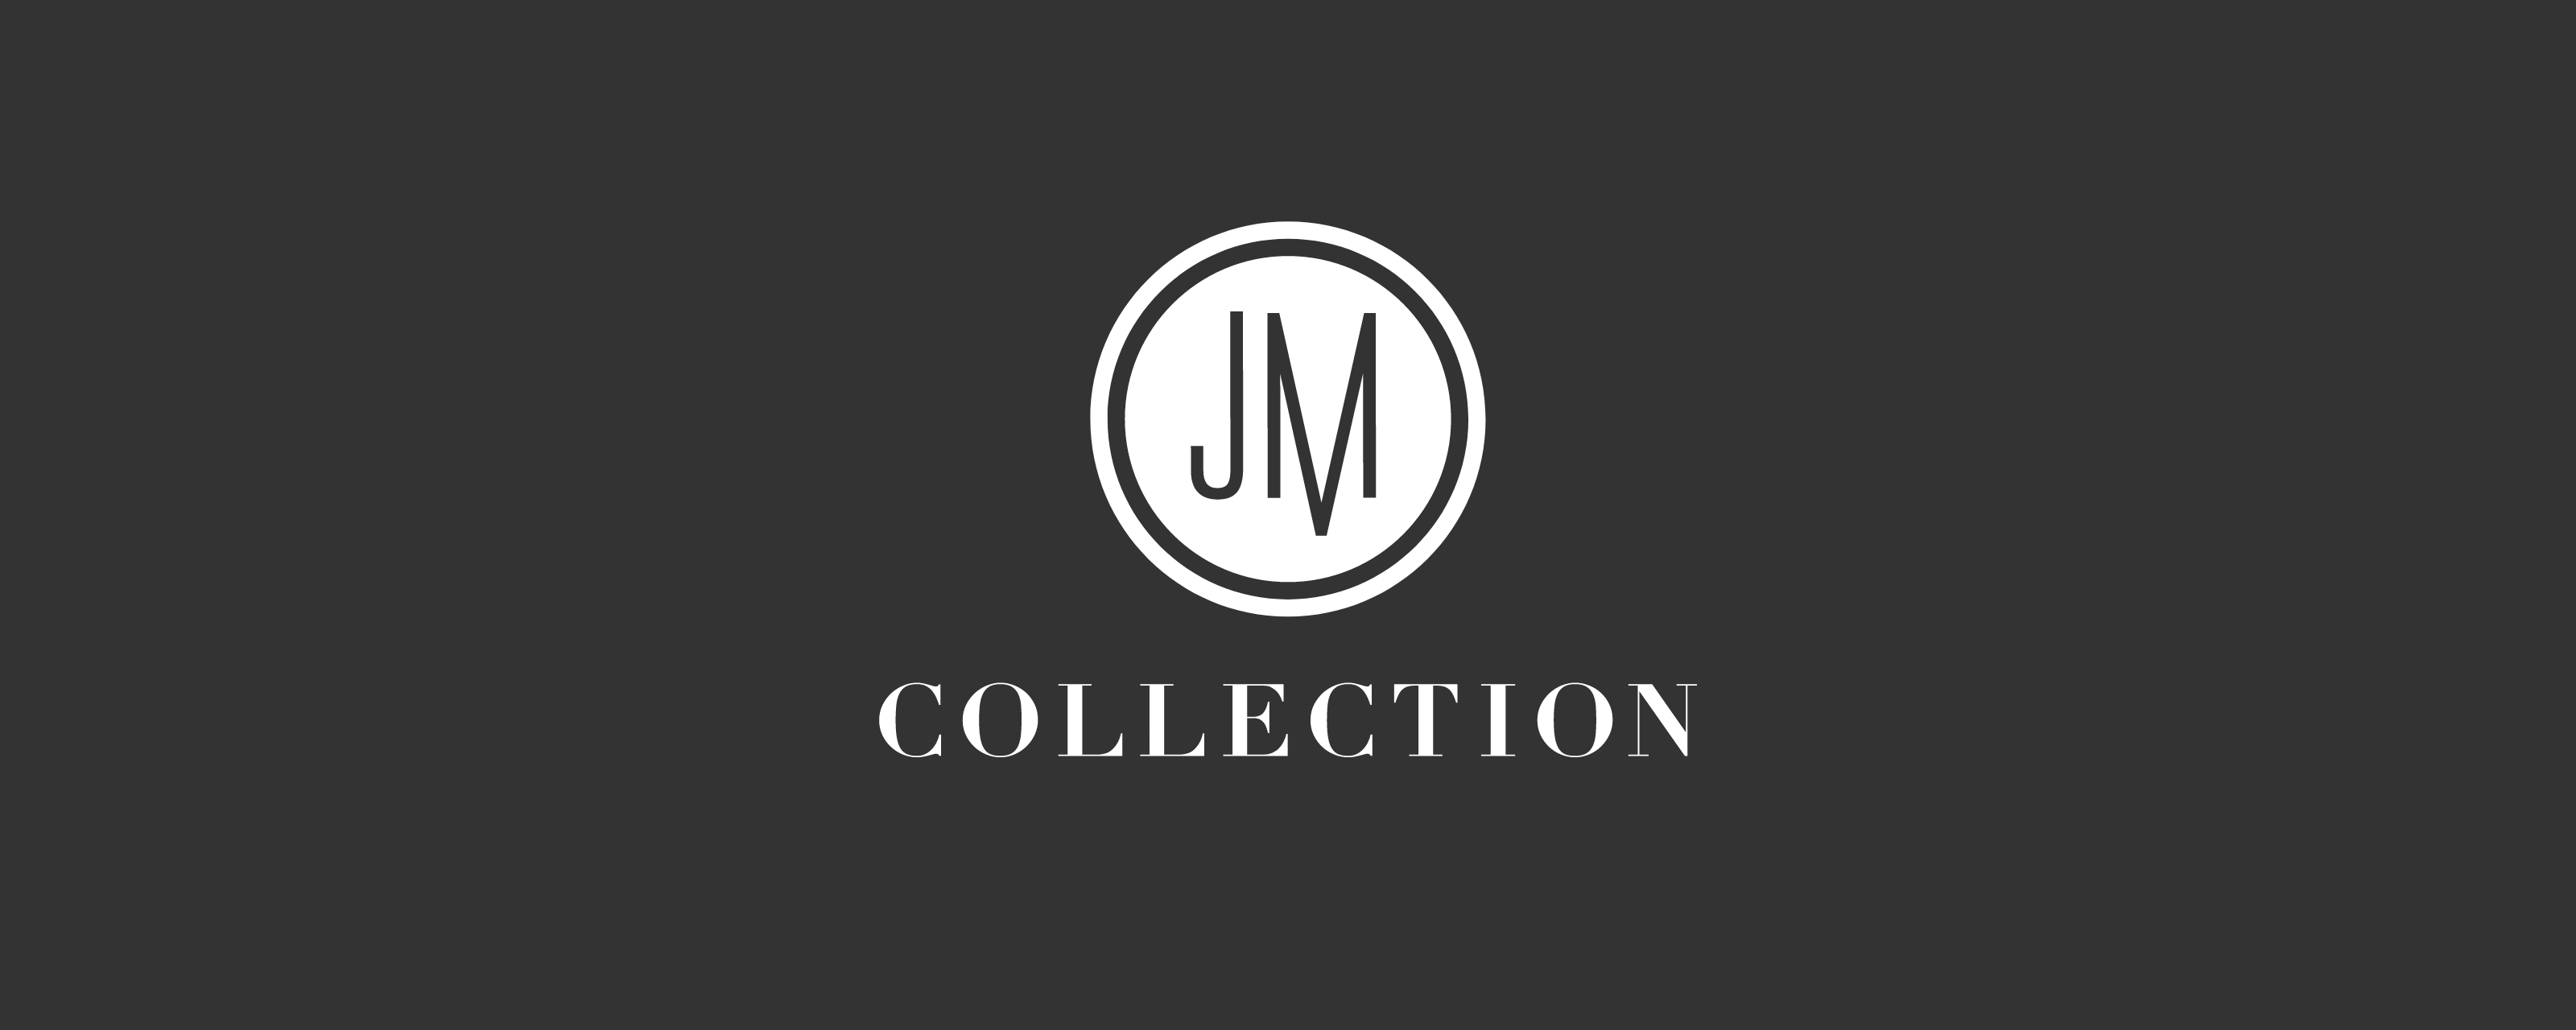 J.M. Collection